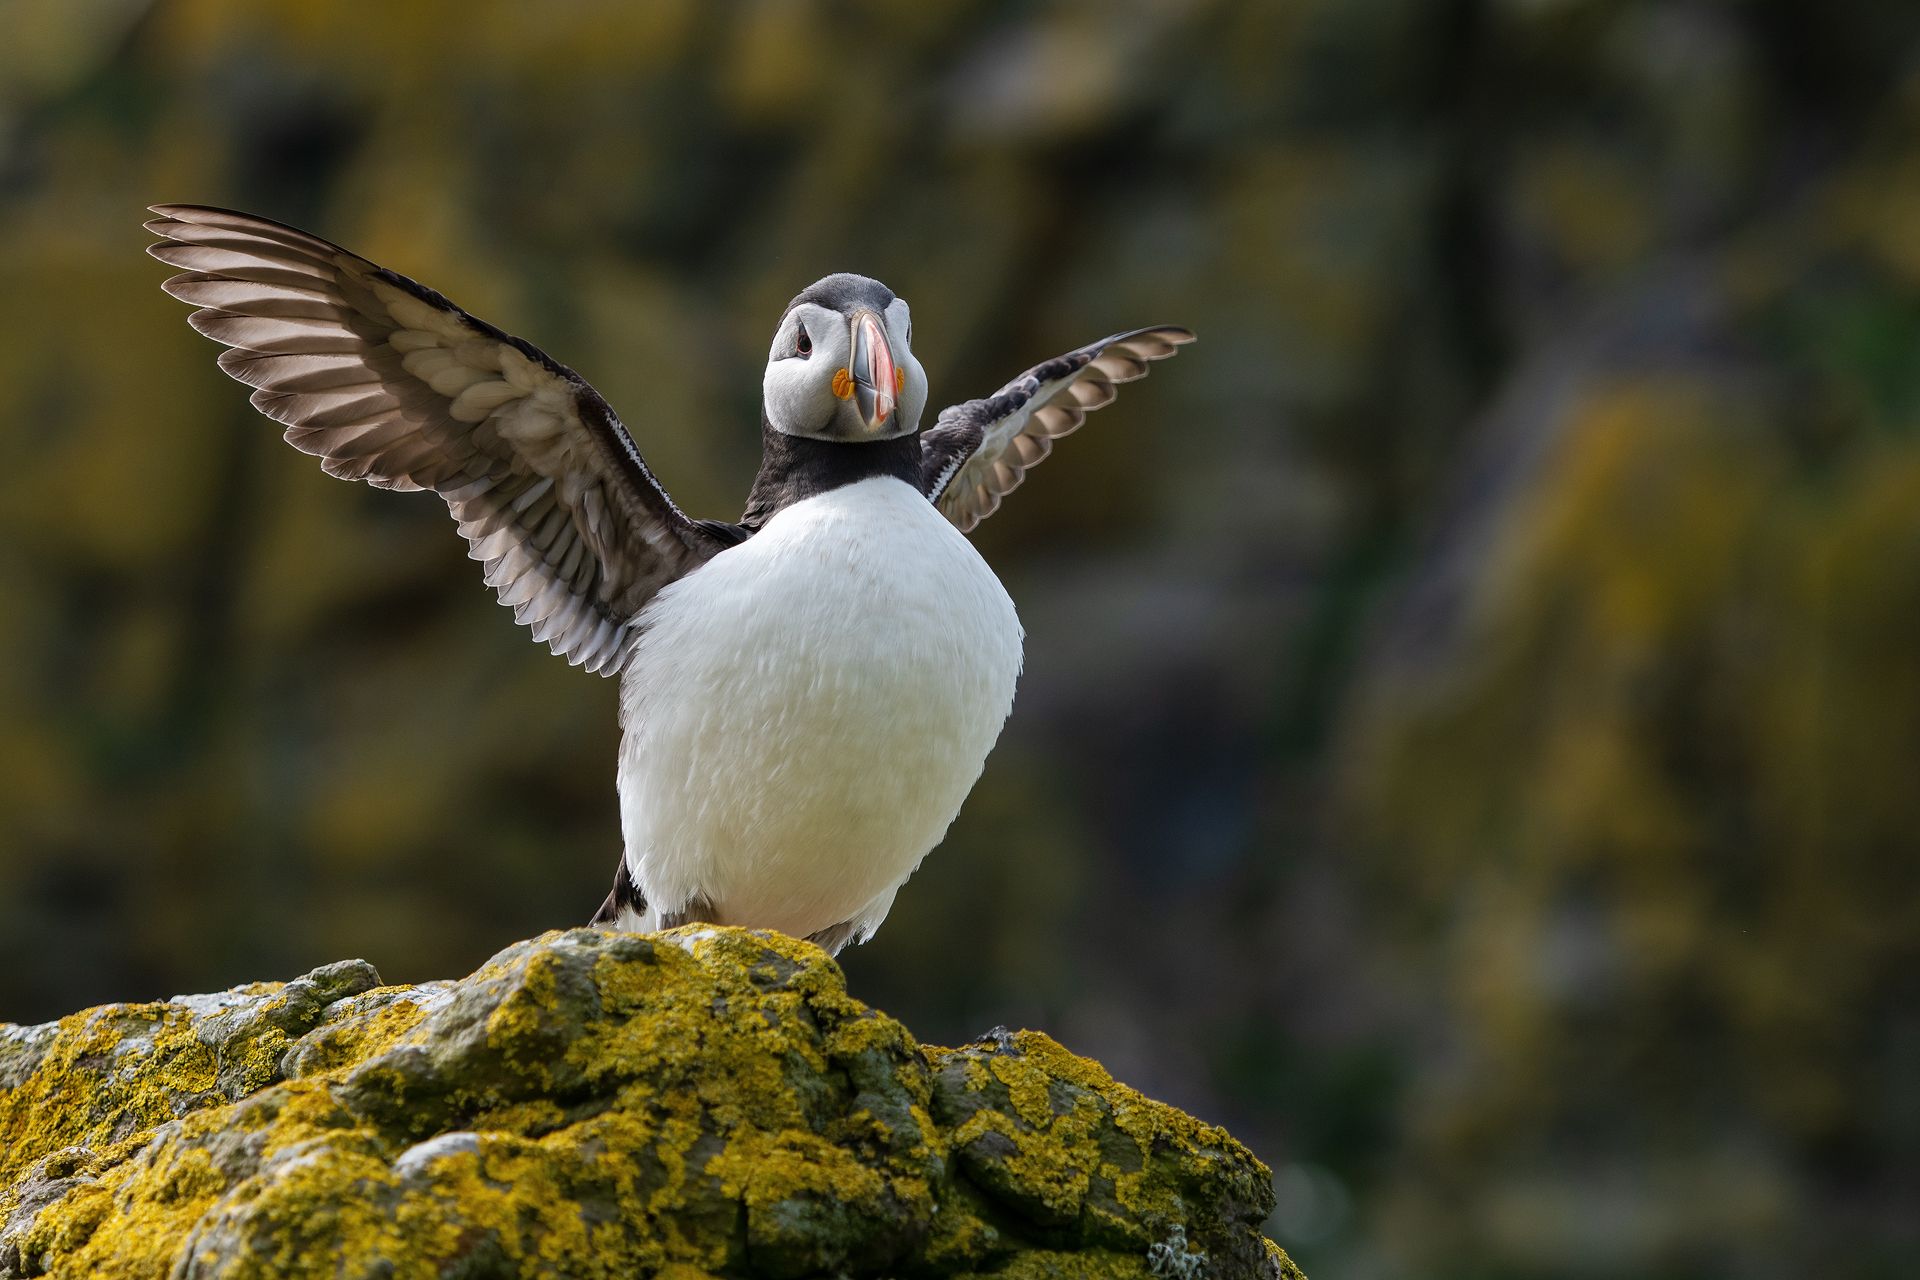 Spreading the wings – puffin on Lunga